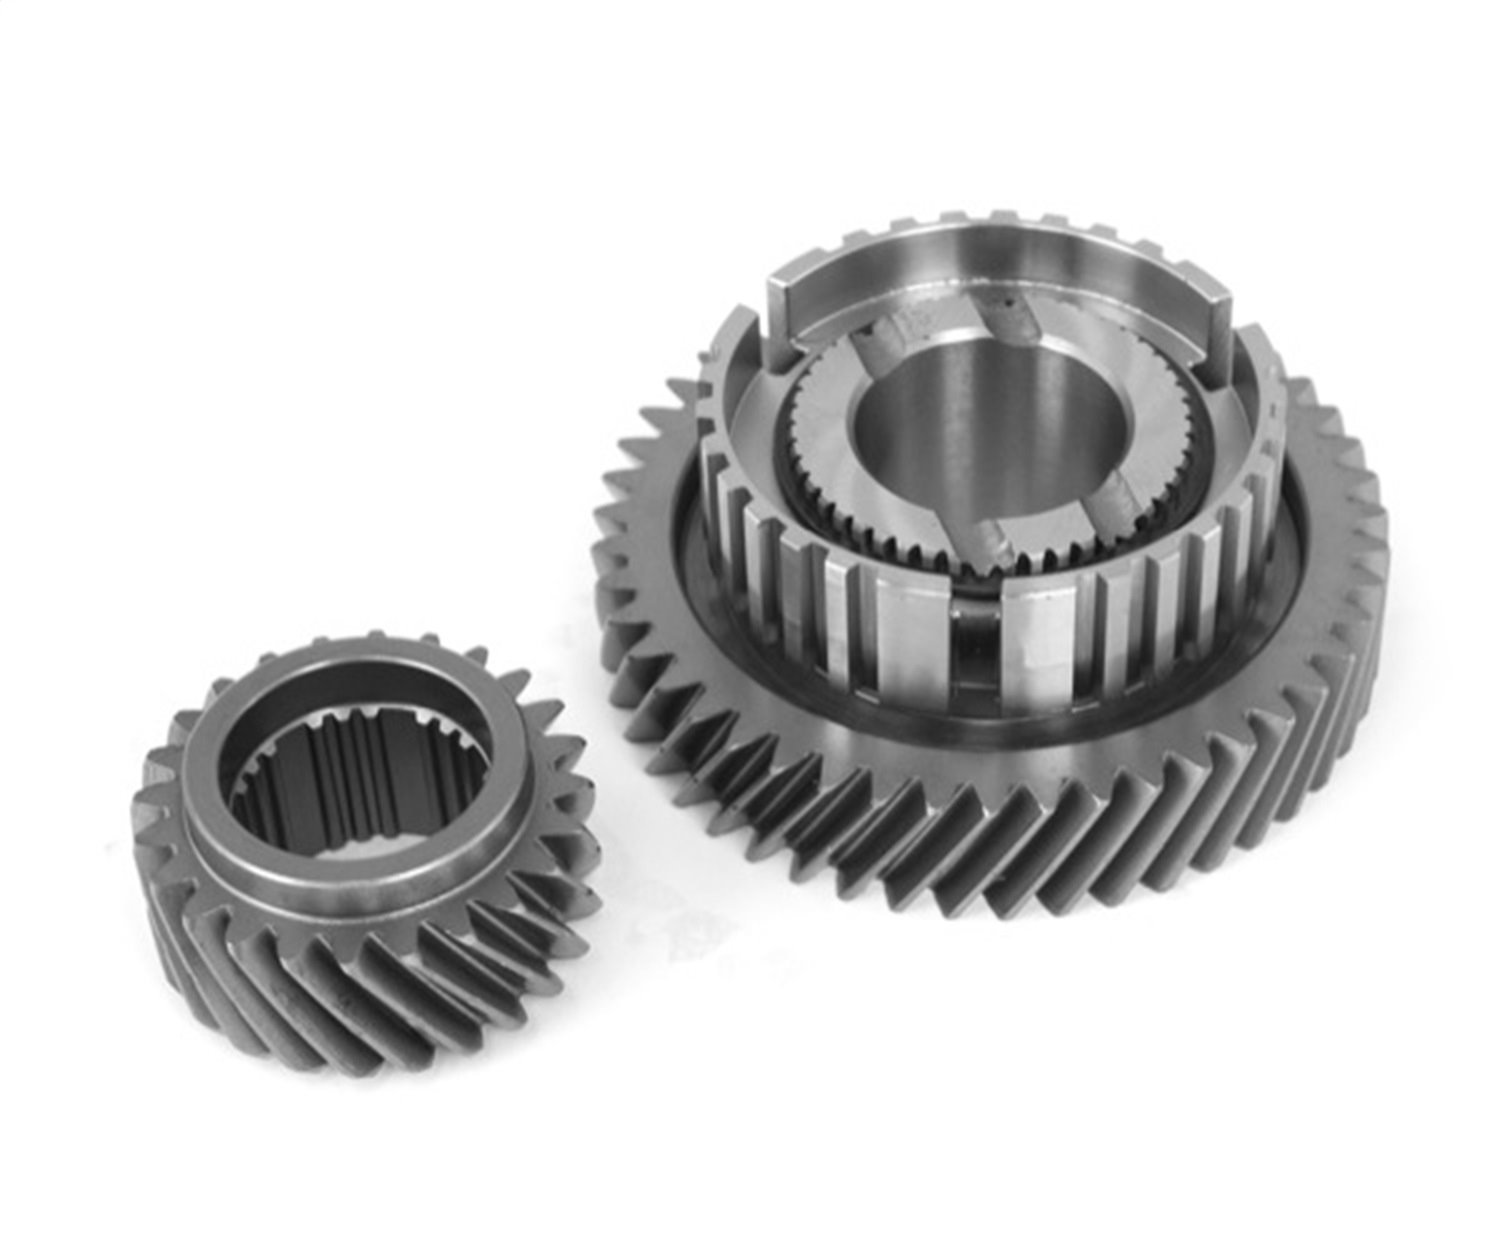 Mainshaft 5th Gear Kit Jeep Wrangler YJ 1987-1995 TJ 1997-1999 Cherokee XJ 1984-99. includes 5th Gear and Counter